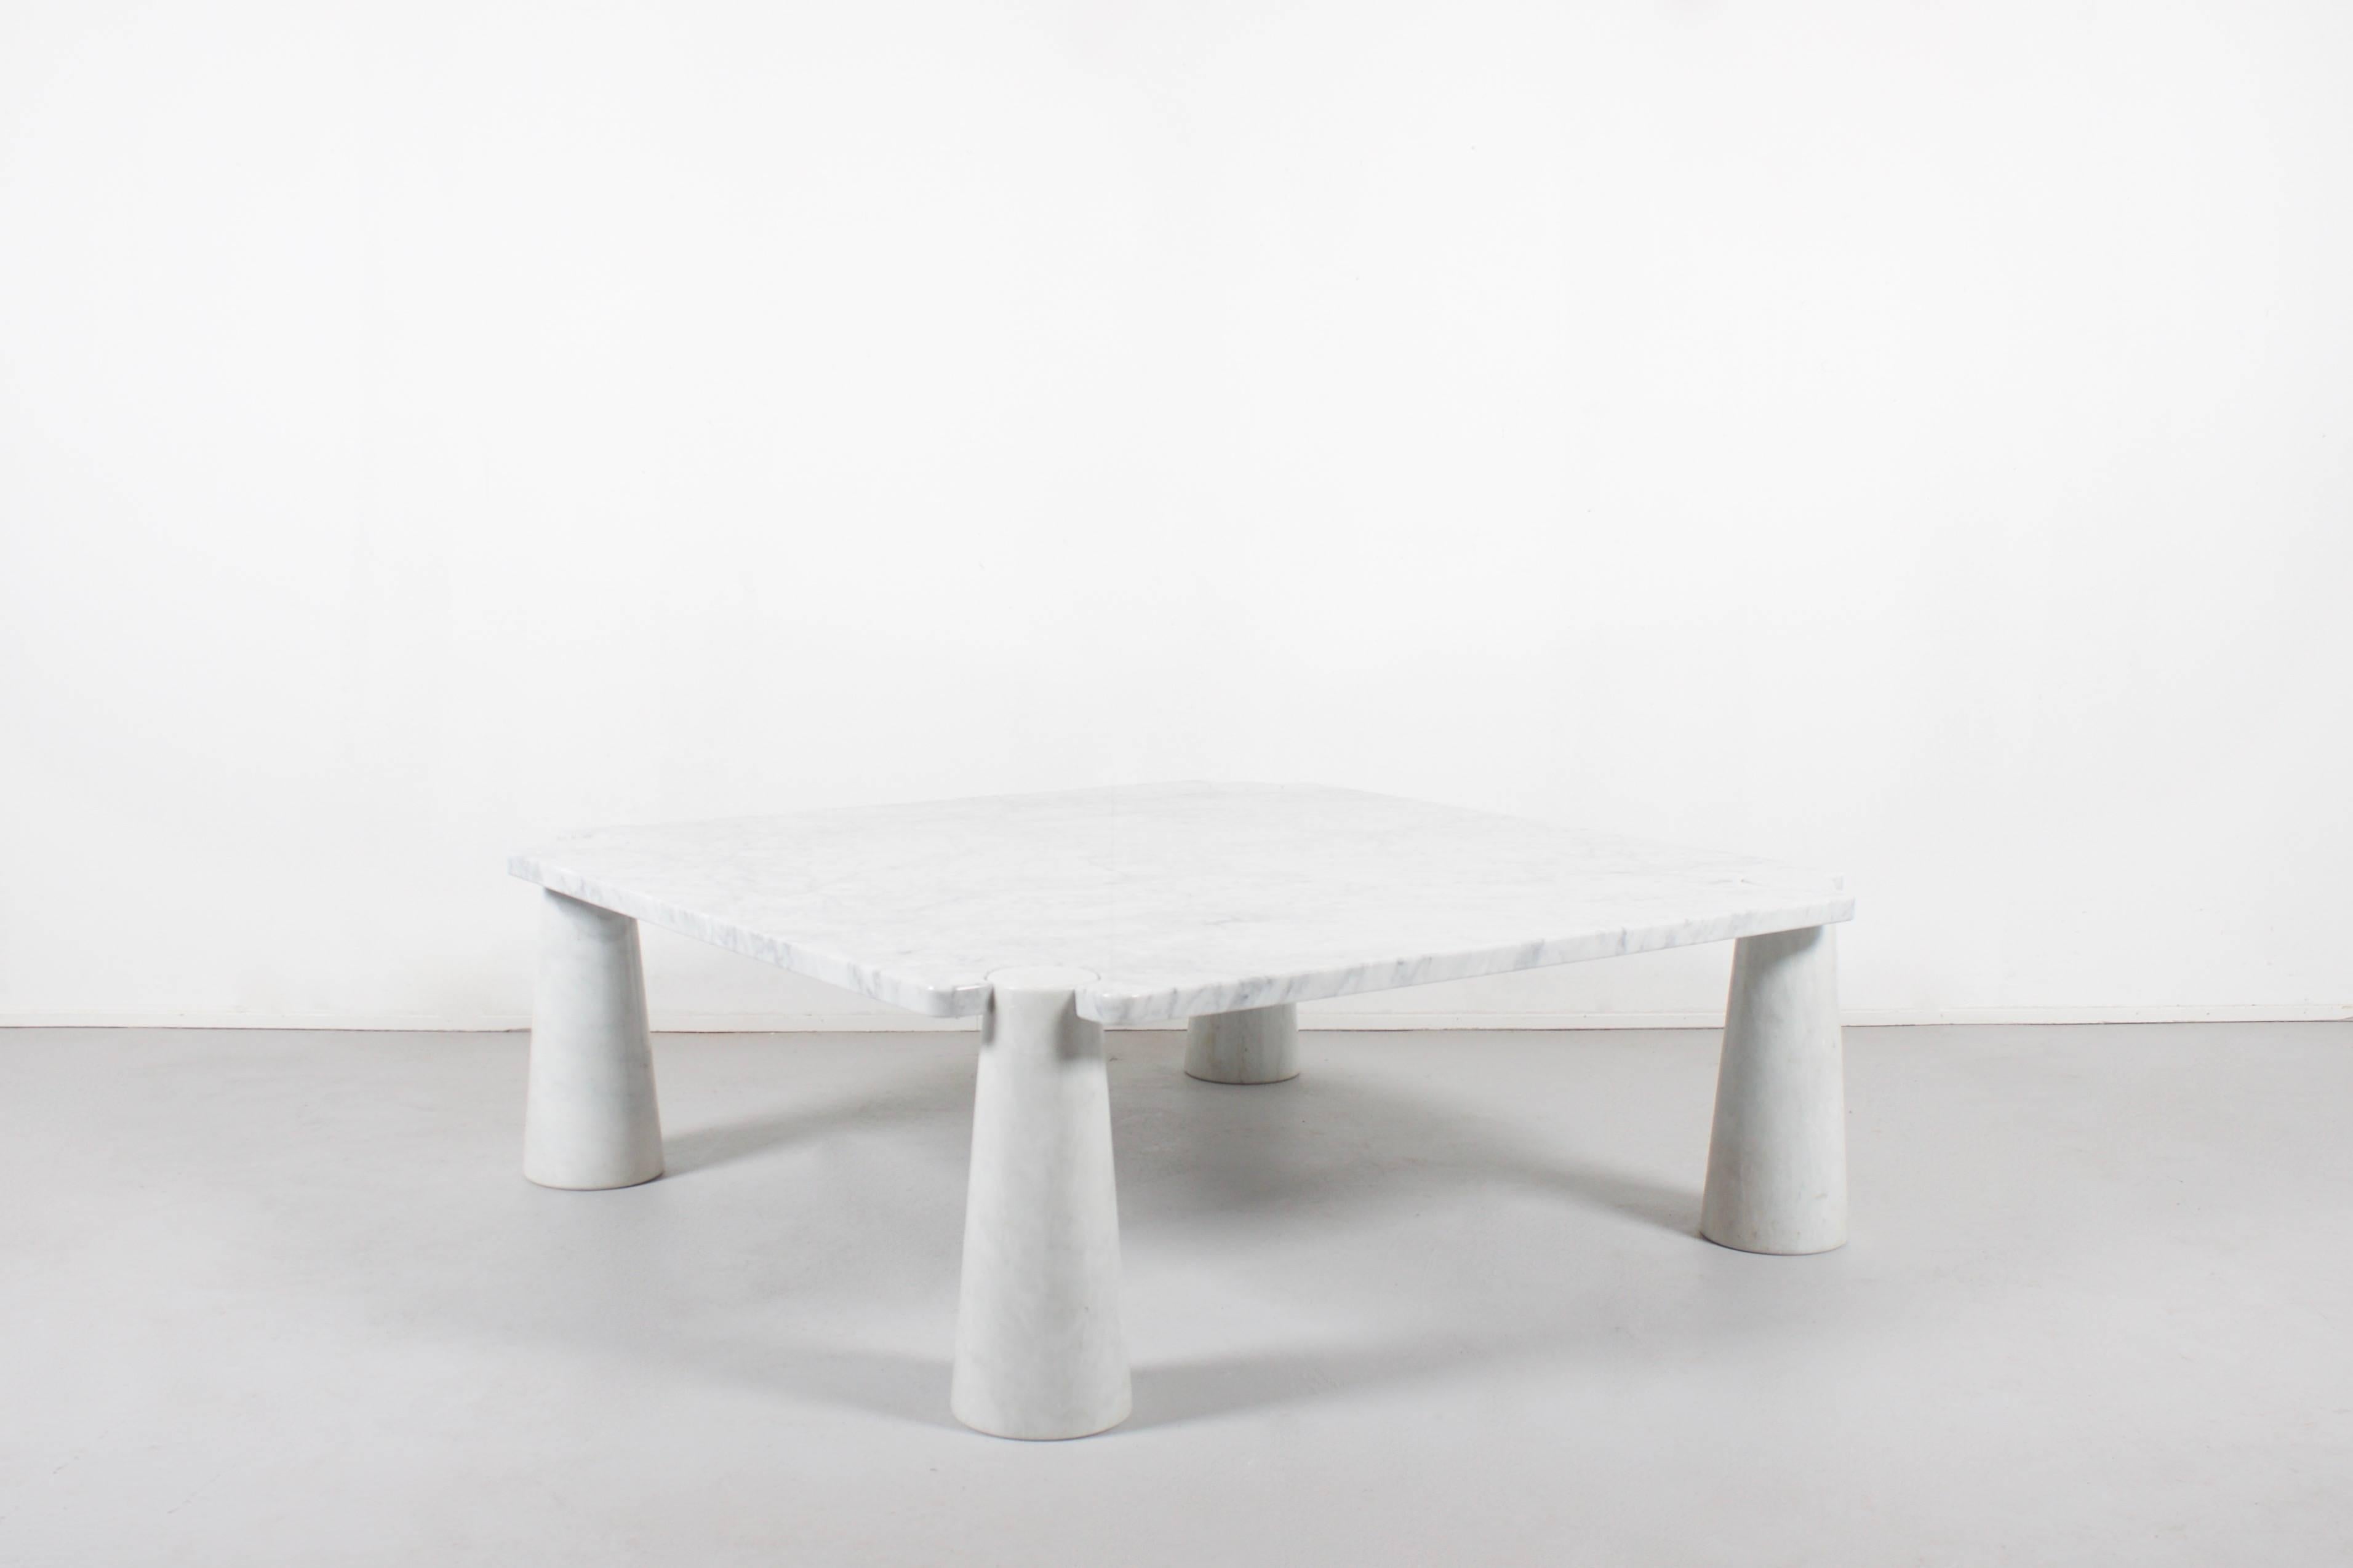 Fantastic ‘Eros’ coffee table in excellent condition. 

This particular table consists of a white Carrara marble top and conical bases. 

The structural design of the Eros tables incorporate a gravity-based embedding between the table top and